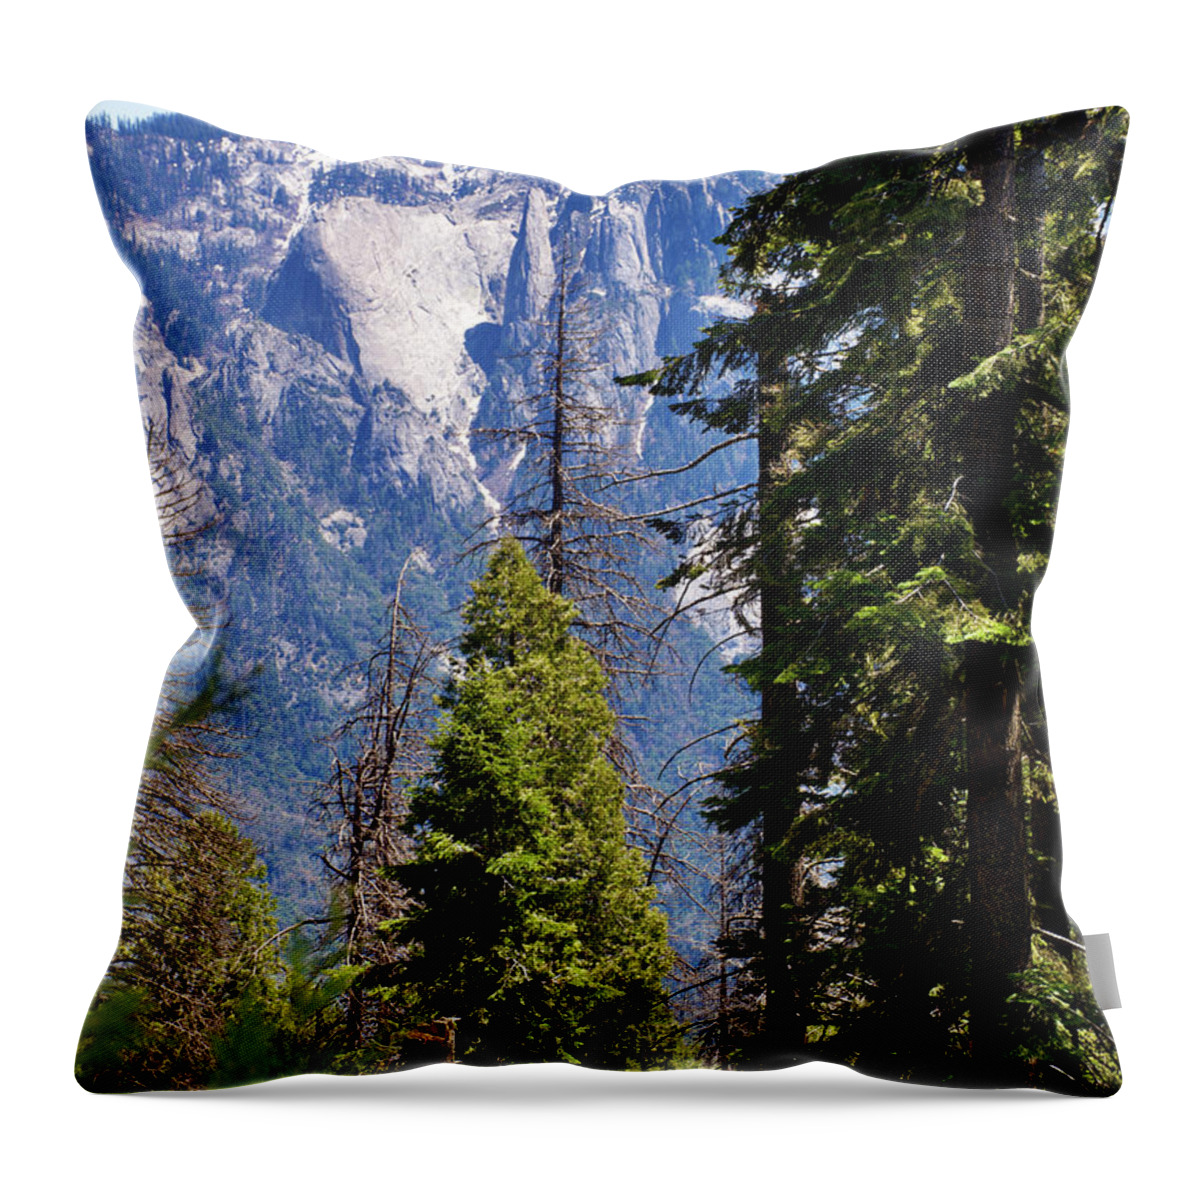 Peaks And Pines In Sequoia National Park Throw Pillow featuring the photograph Peaks and Pines in Sequoia National Park, California. by Ruth Hager